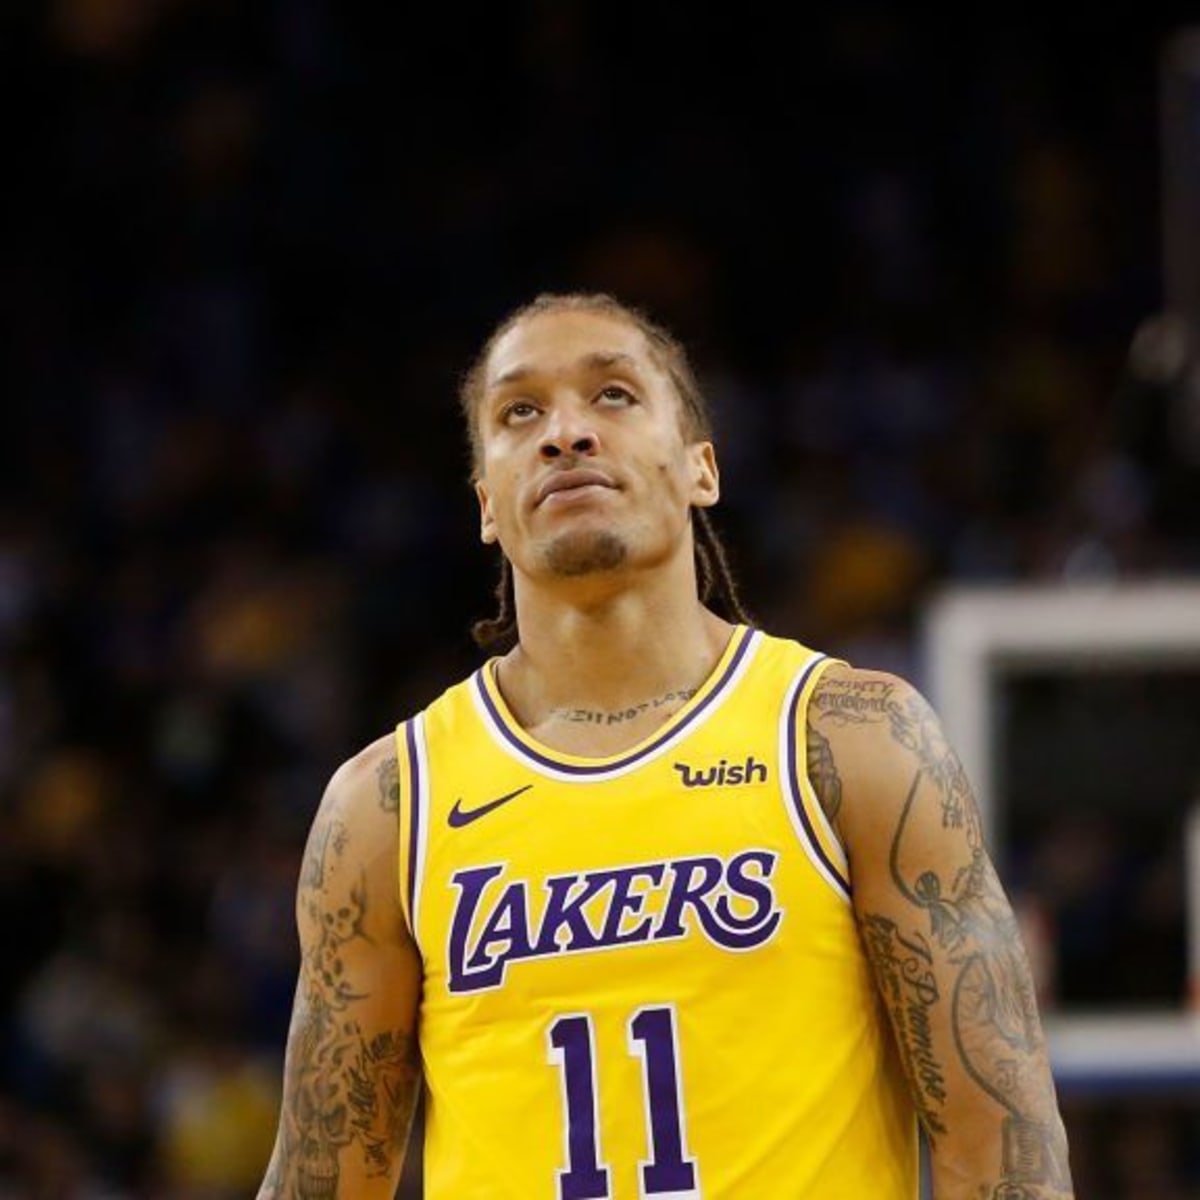 Kevin Durant Says Michael Beasley Is as Skilled as LeBron James